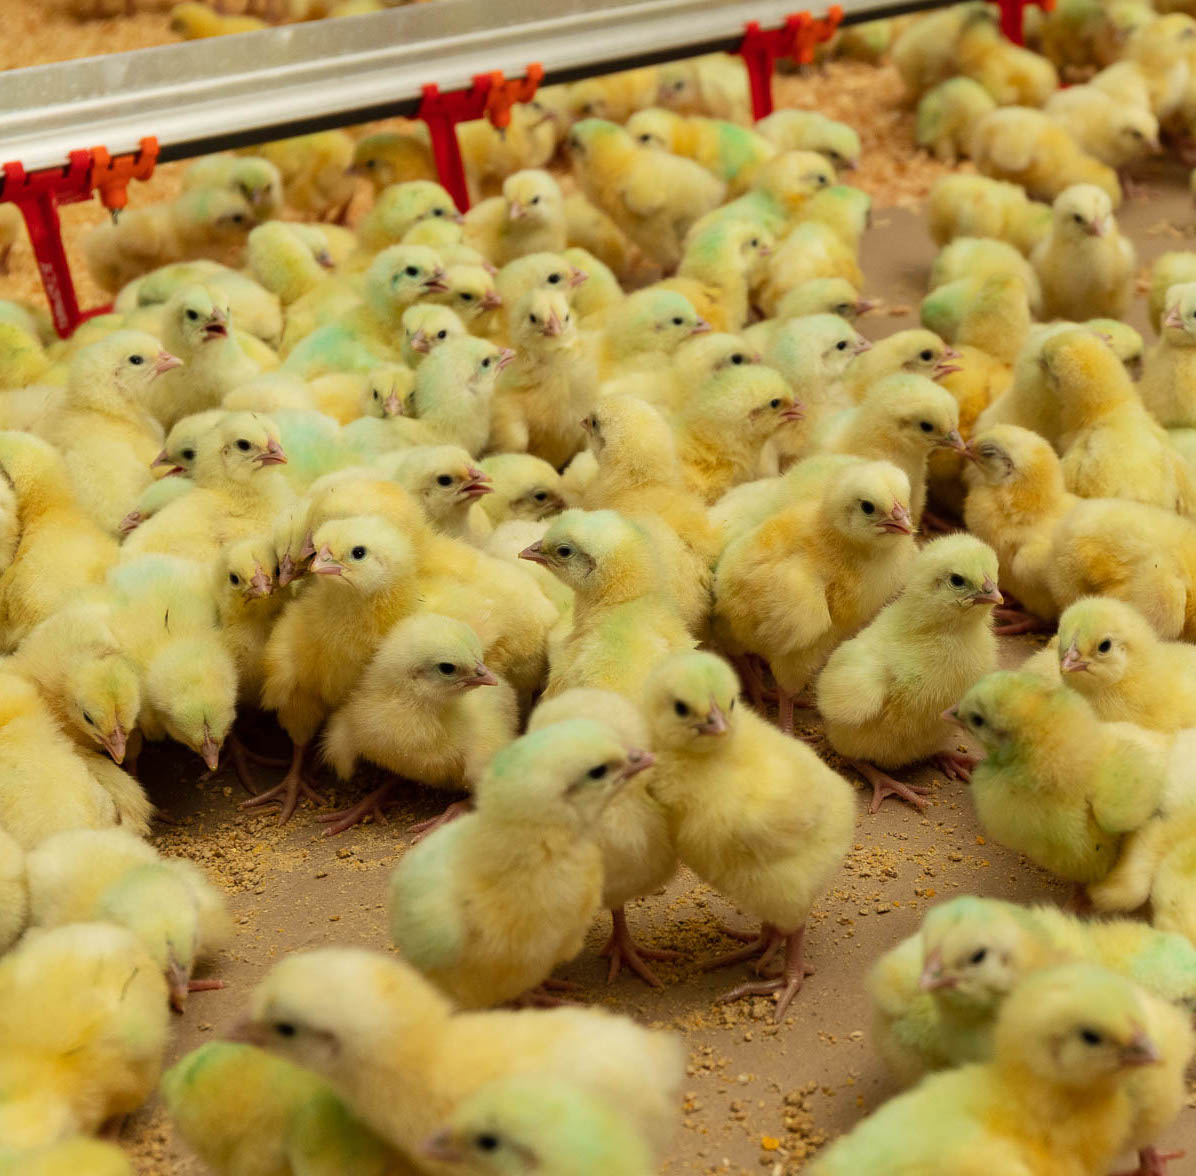 Chicks marked with a blue-green tint, indicating that they have been vaccinated